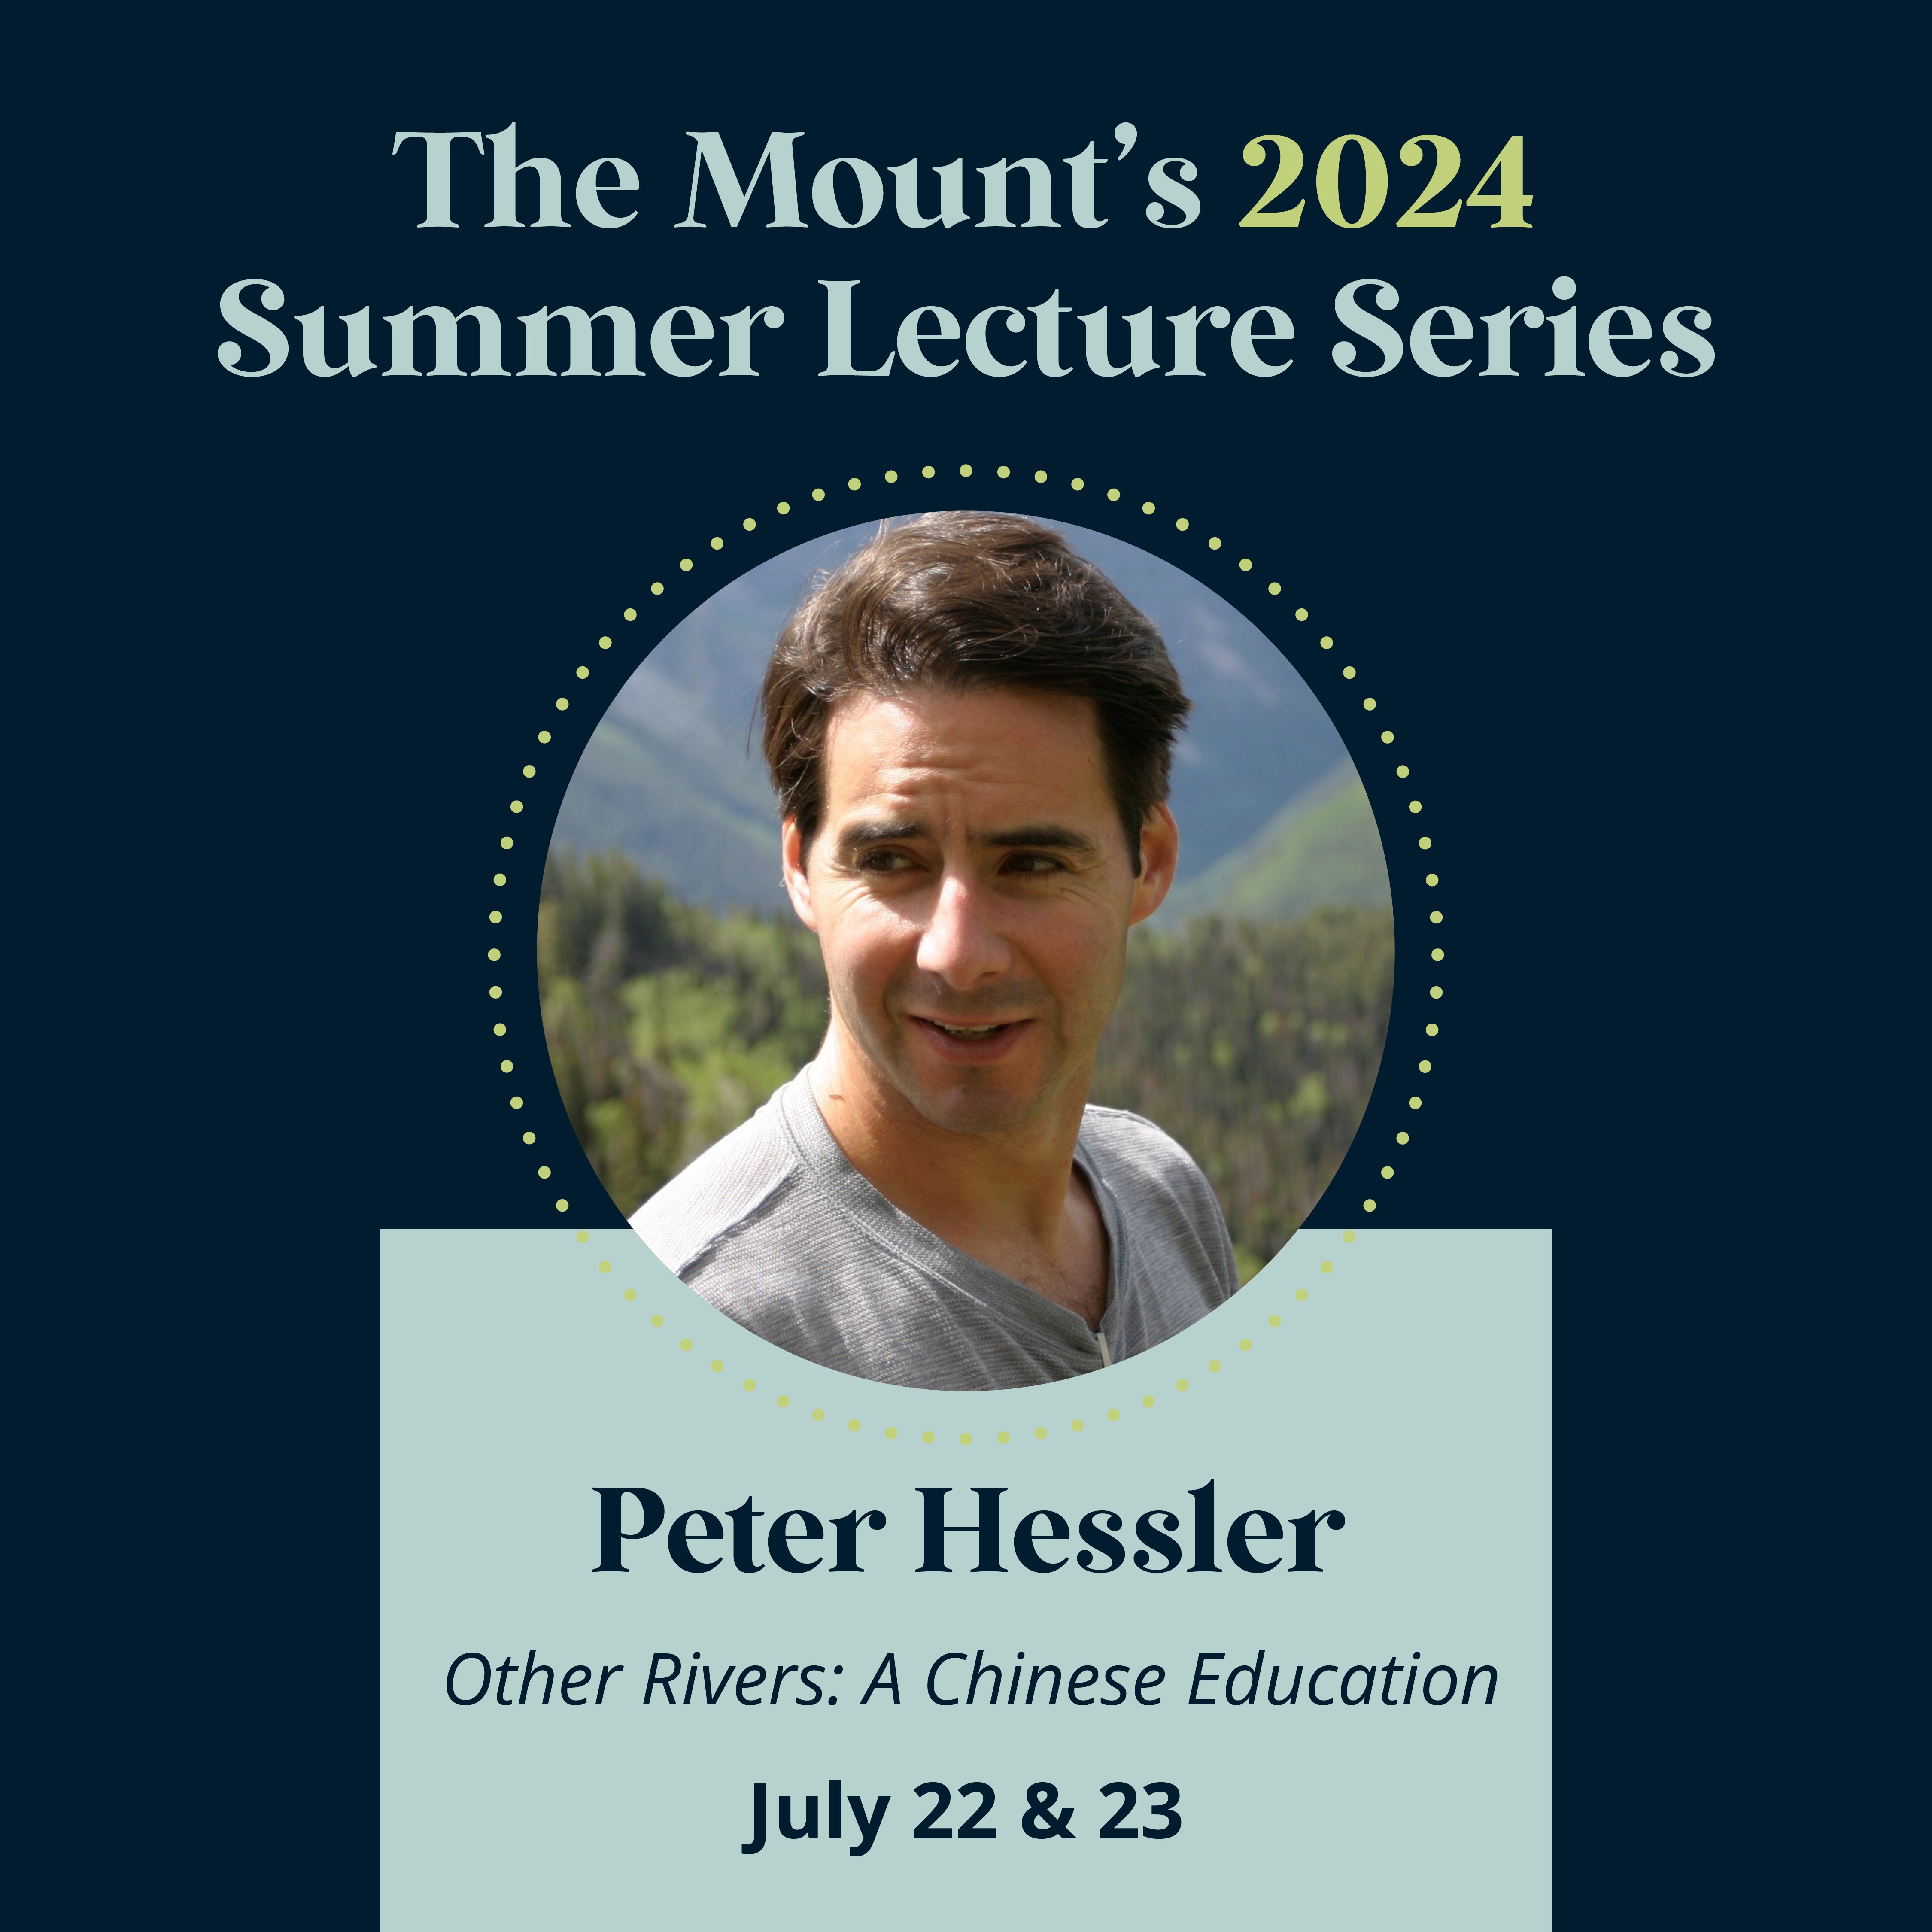 Monday lecture with Peter Hessler